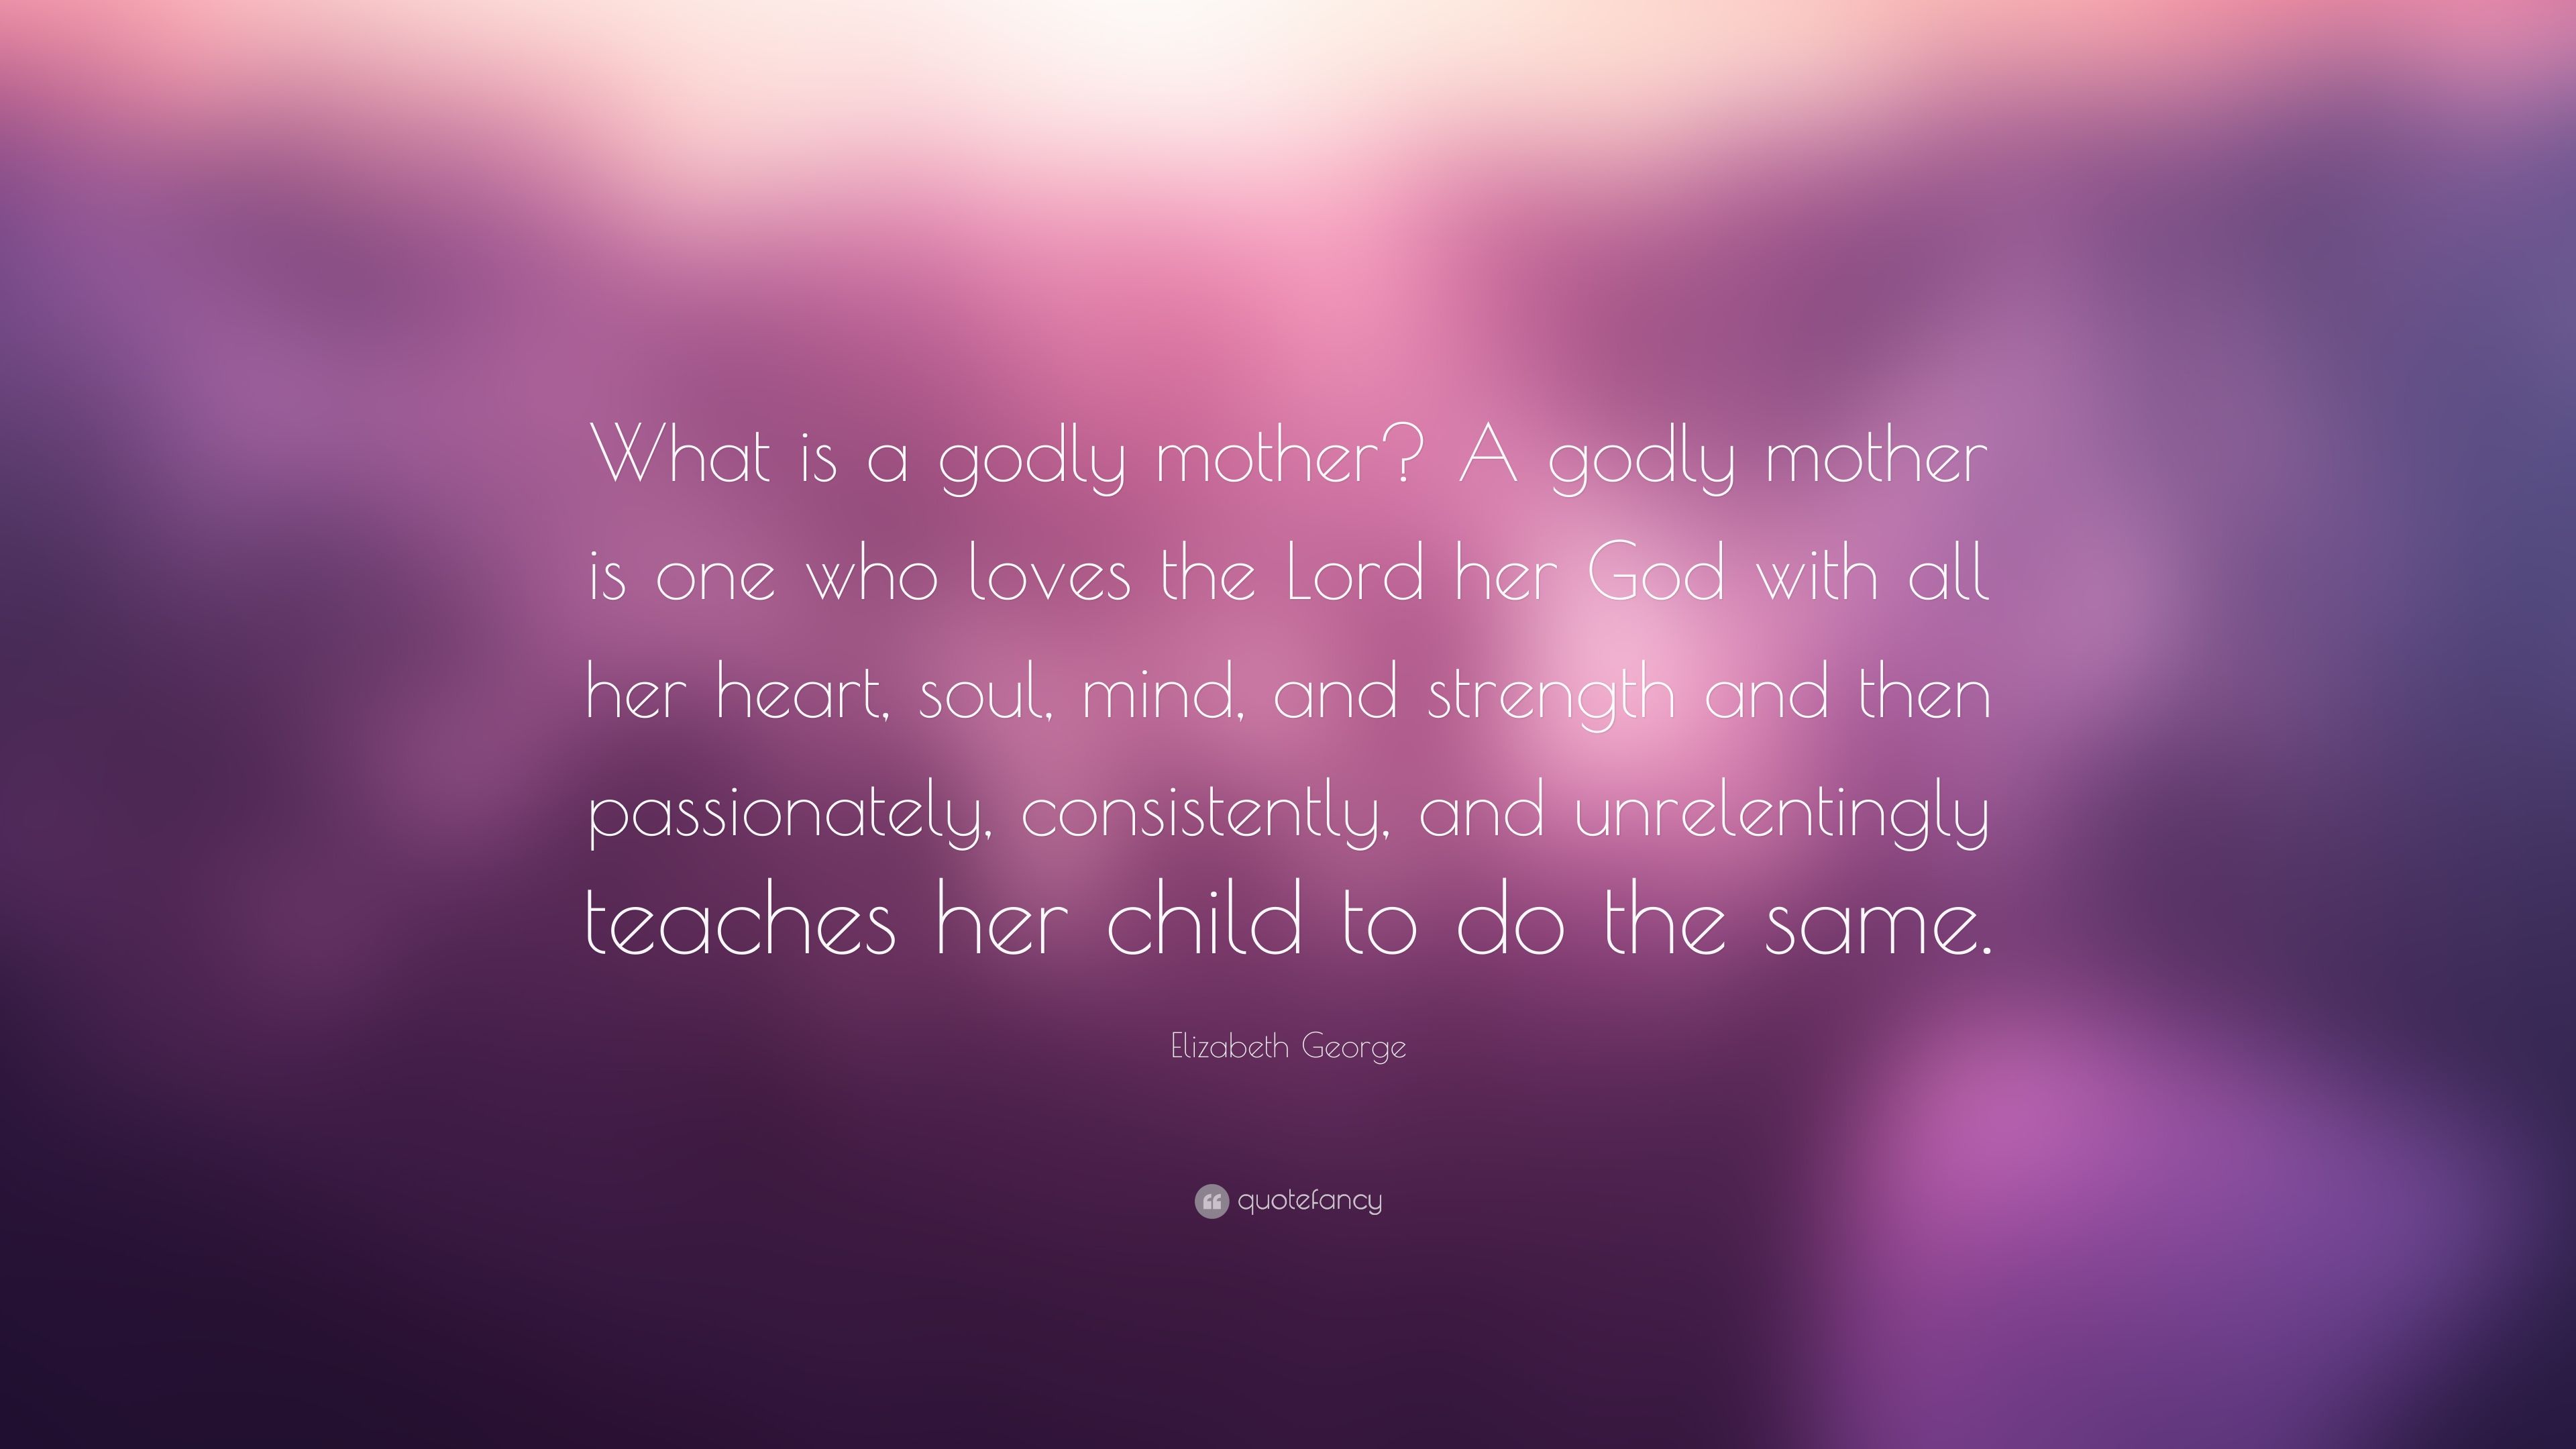 Elizabeth George Quote: “What is a godly mother? A godly mother is one who loves the Lord her God with all her heart, soul, mind, and strength an.” (7 wallpaper)